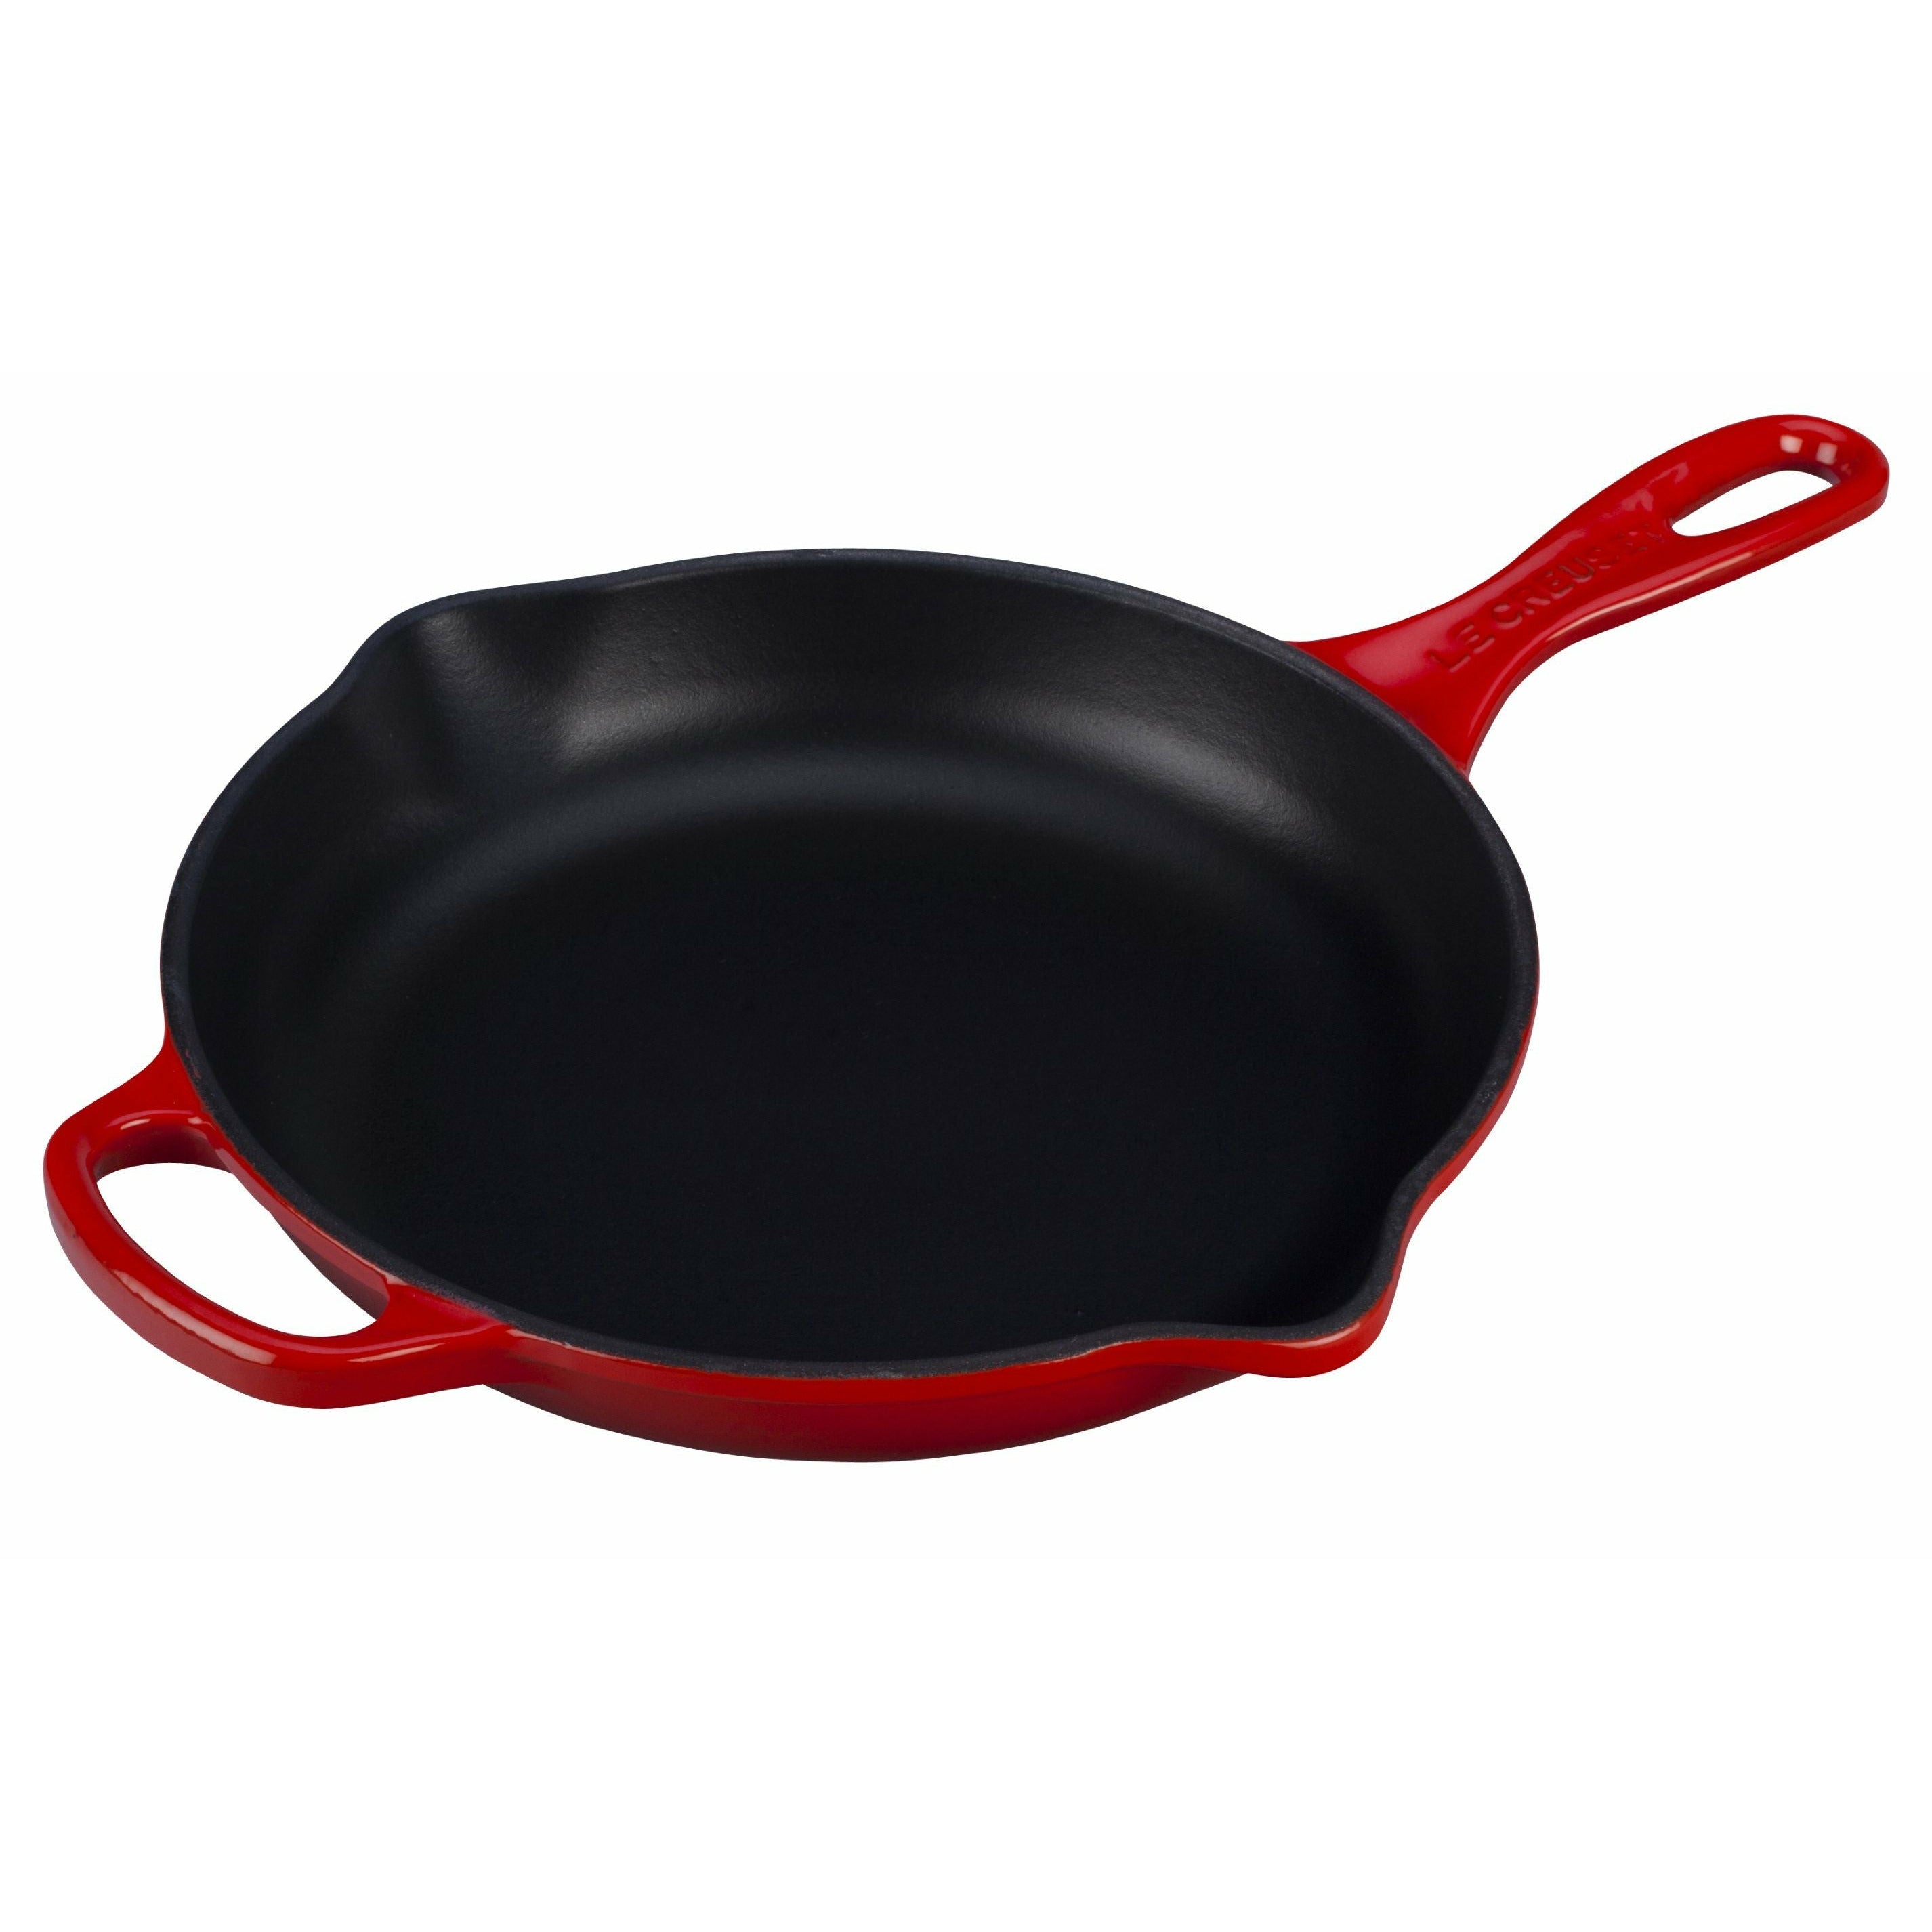 Le Creuset Signature Round Frying And Serving Pan 20 Cm, Cherry Red